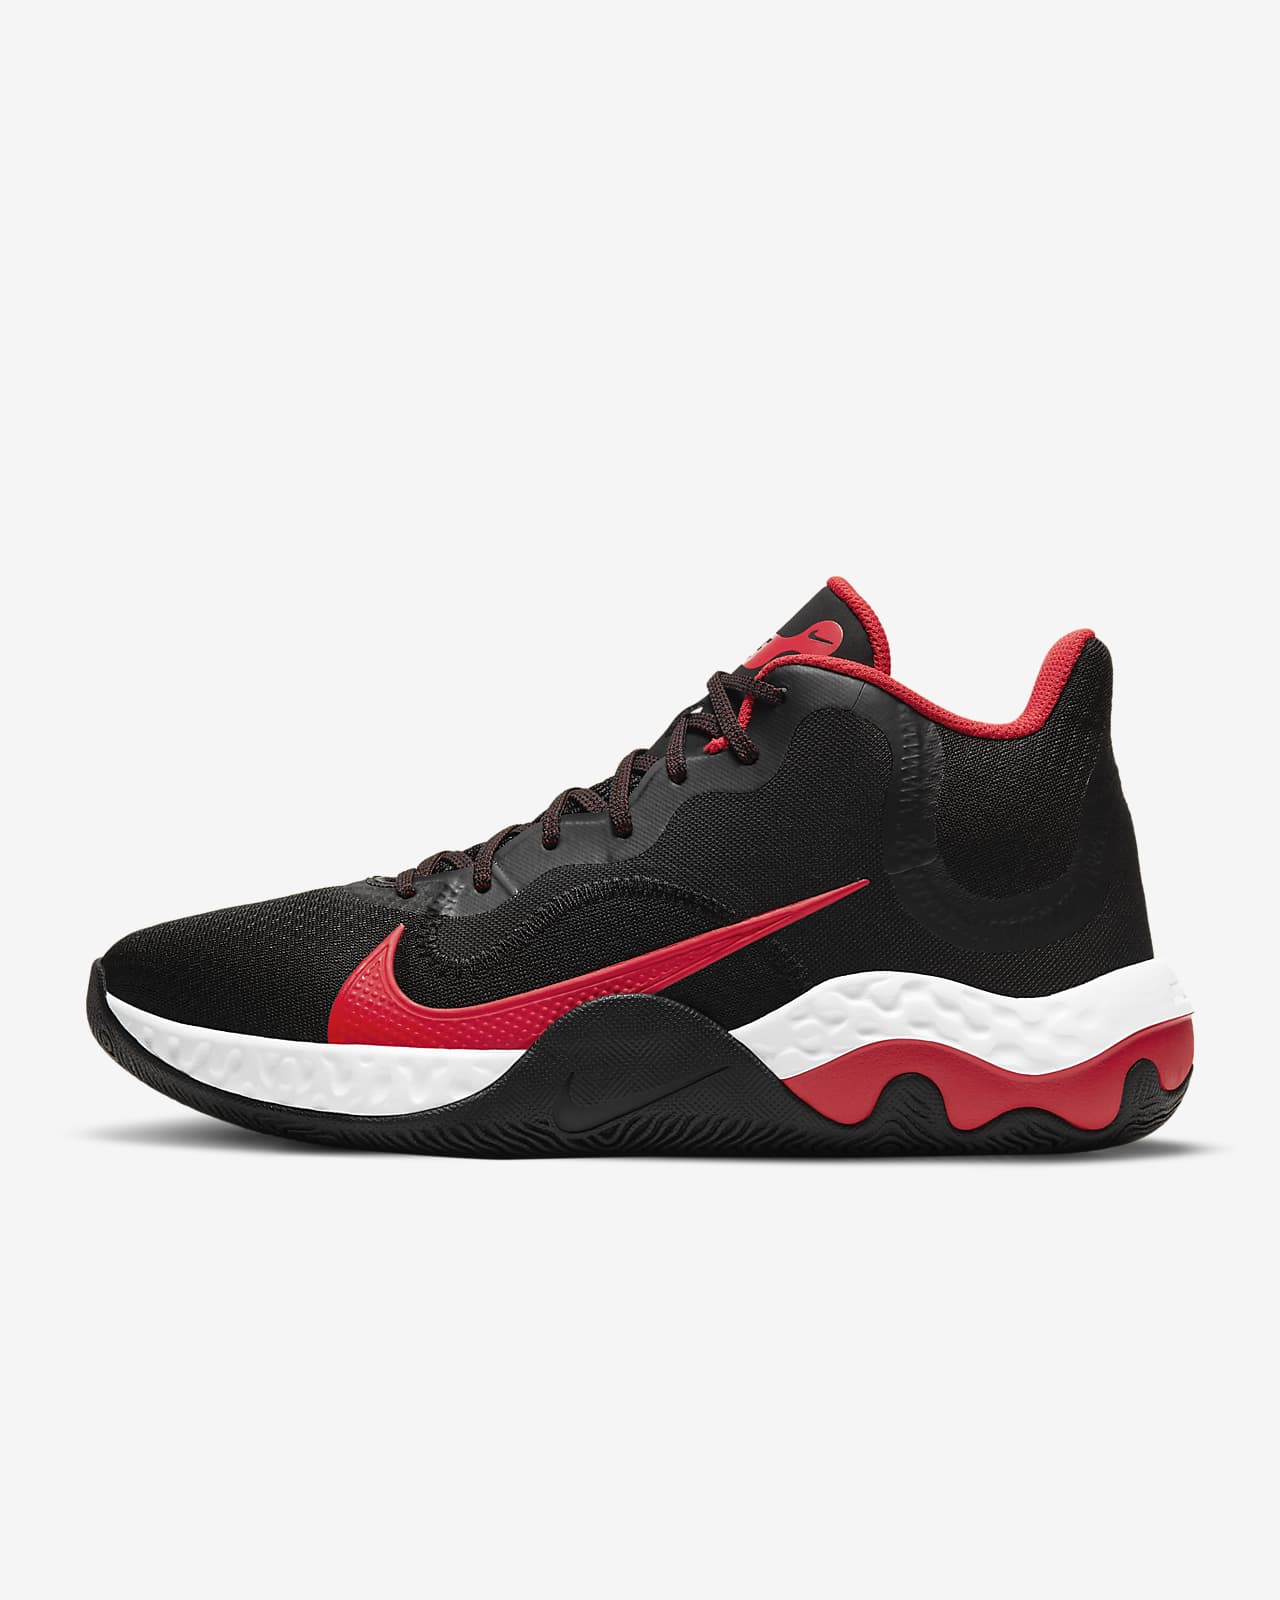 black and red shoes nike